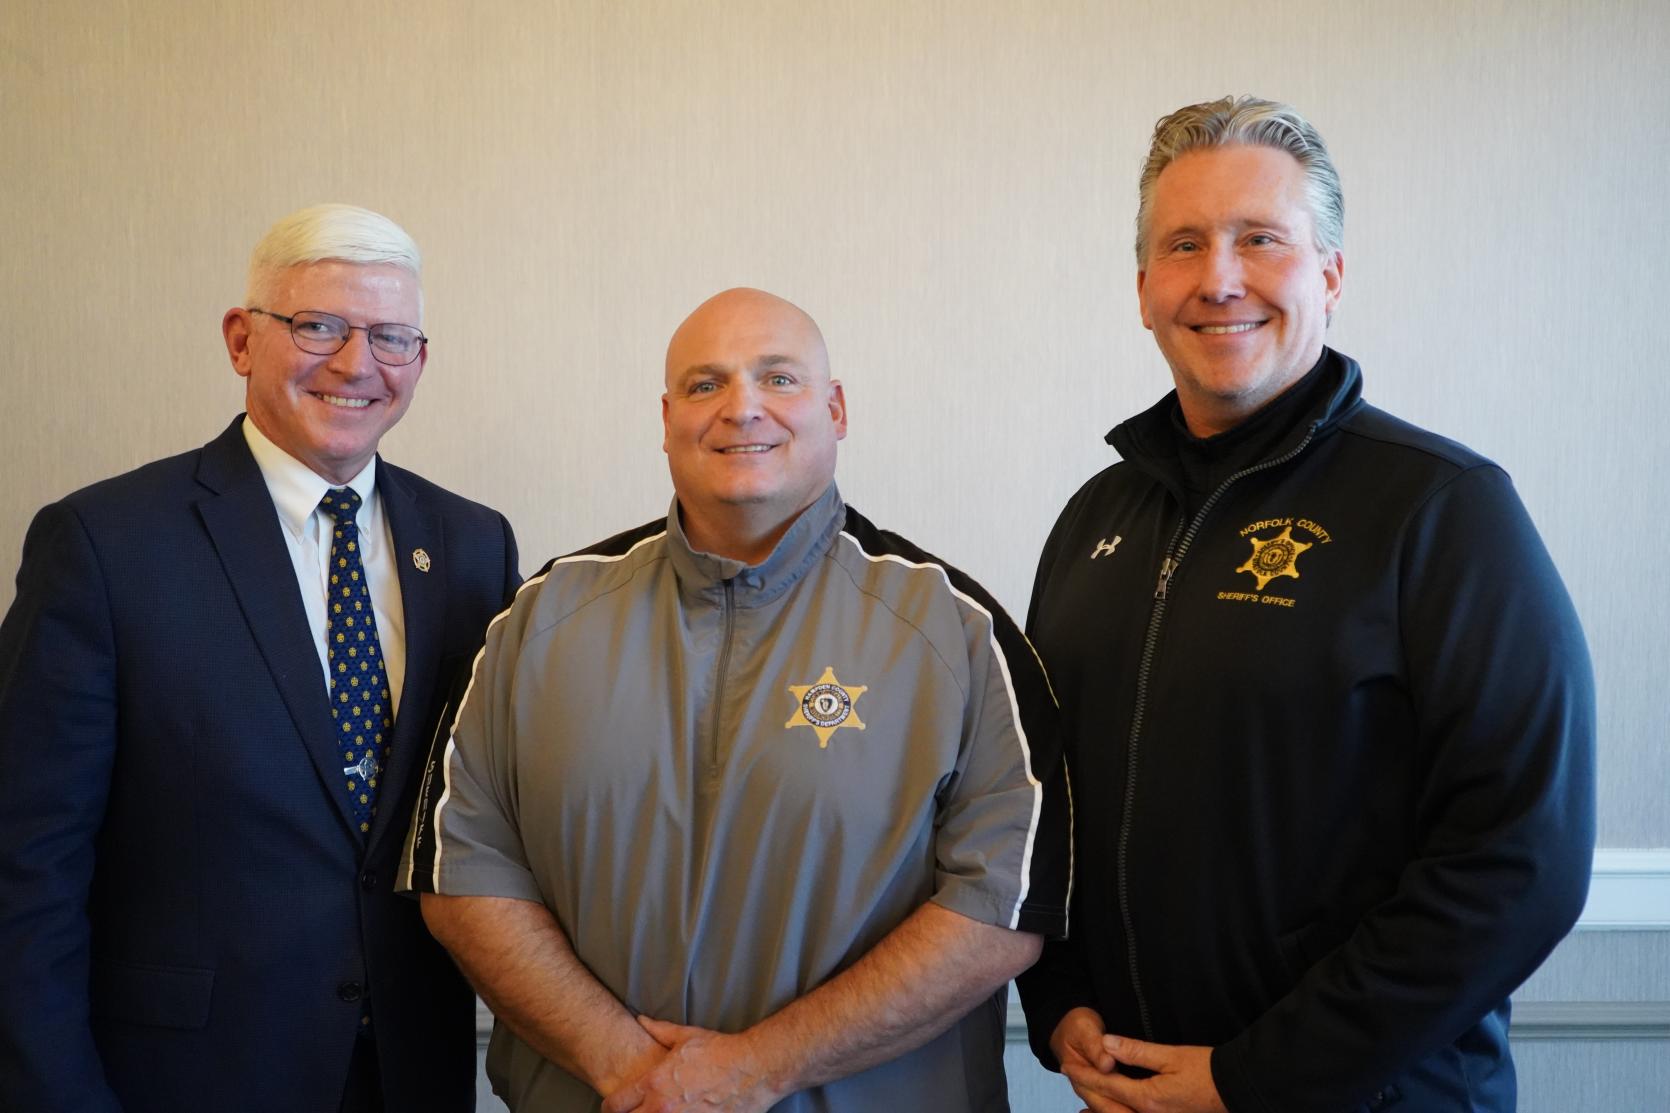 The new President Sheriff Nicholas Cocchi (center), Vice President Sheriff Patrick McDermott (right), and Associate Vice President Sheriff Robert Ogden (left) are pictured together following the Massachusetts Sheriffs’ Association December meeting held on December 8, 2022 at Hotel 1620 Plymouth Harbor in Plymouth, Massachusetts.